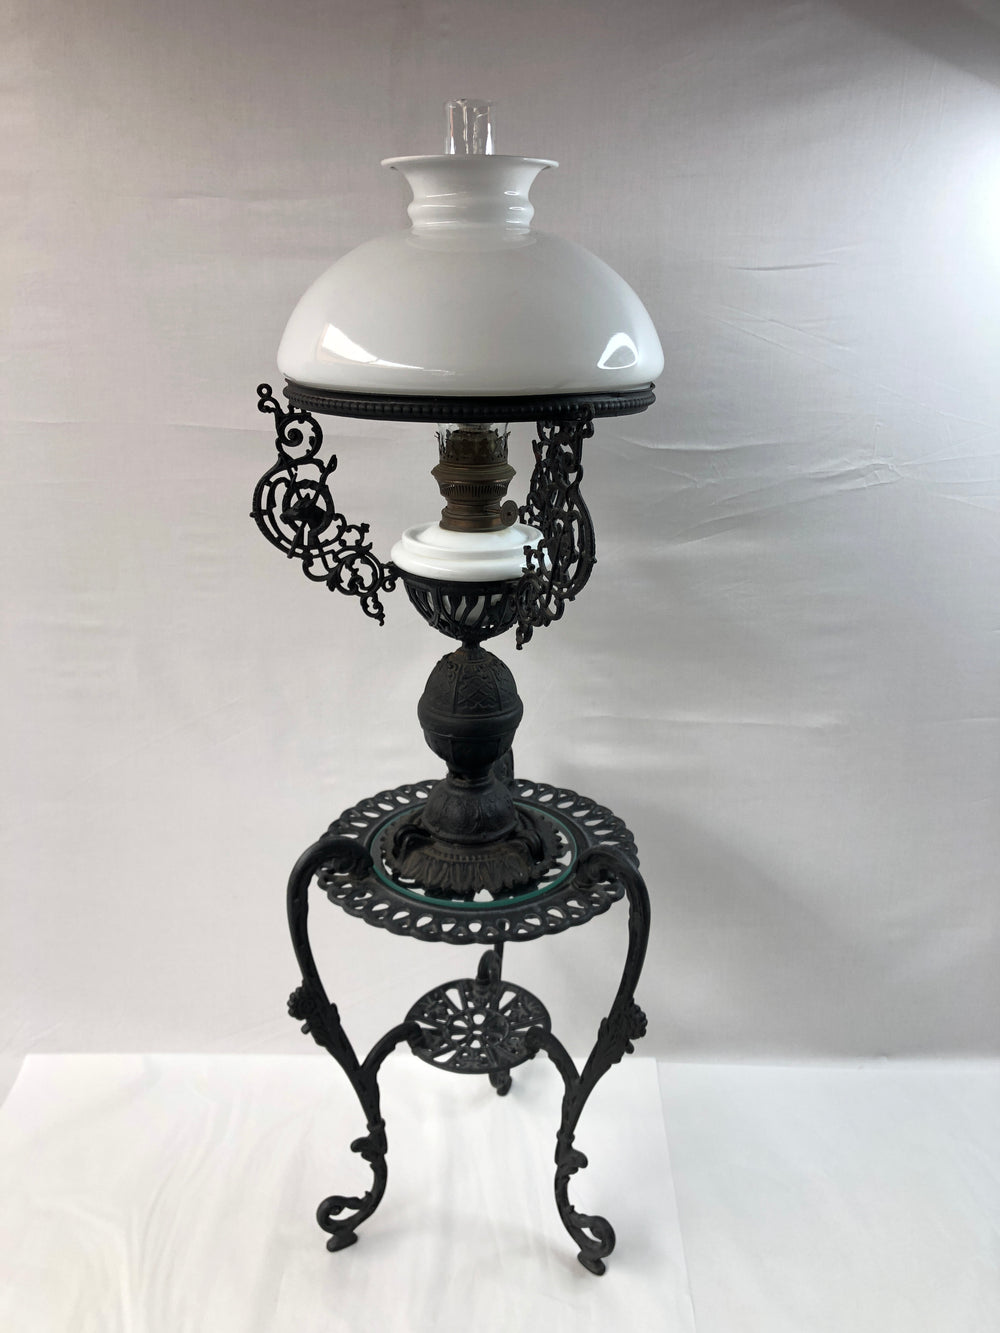 Vintage Metal Paraffin Table Lamp with Metal Table (16329)